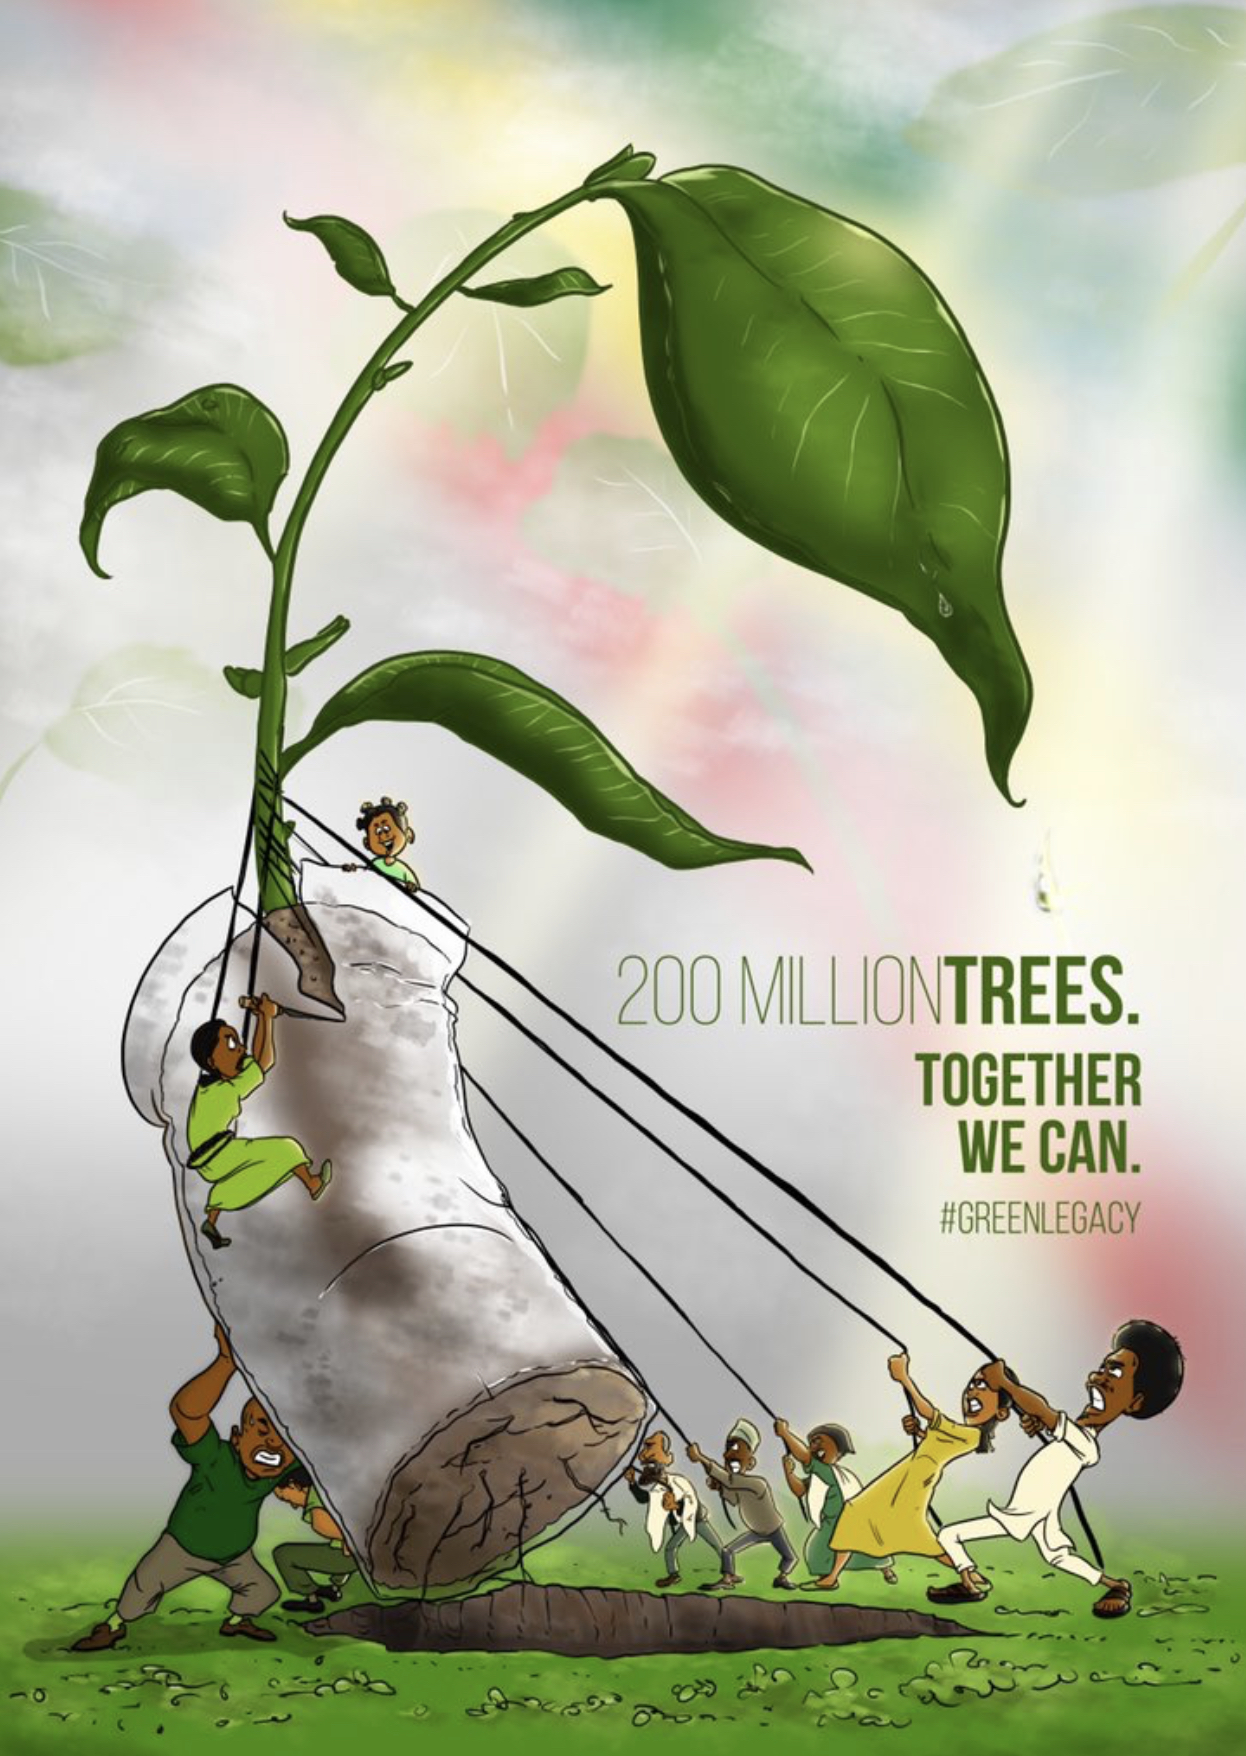 Promotional videos have run on state media urging the public to plant and care for trees.